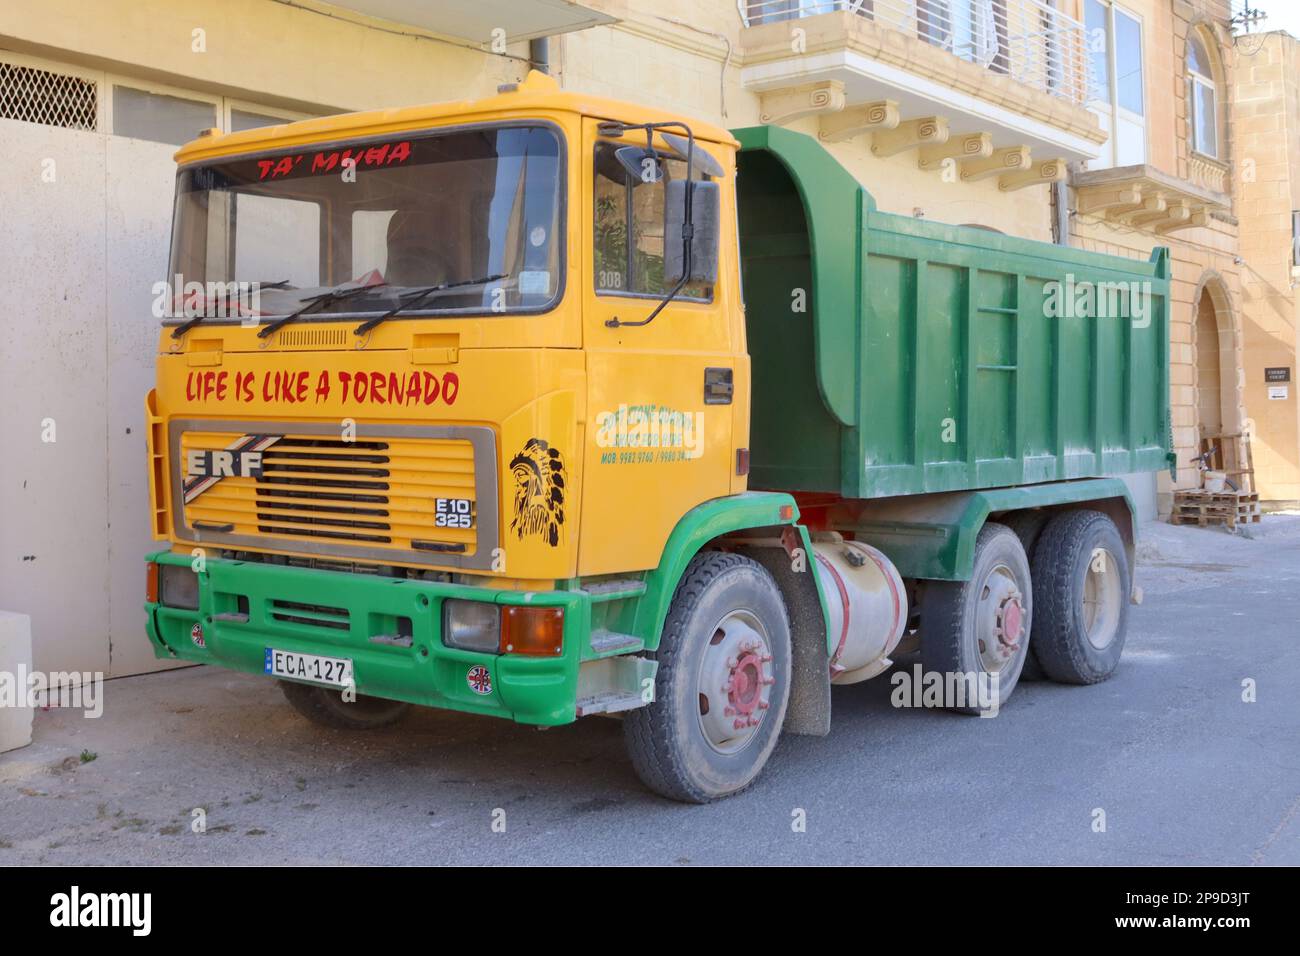 A vintage ERF E10 325 tipper truck cooling off from the Mediterranean heat after a days work, parked outside a private house in Xaghra, Gozo, Malta. Stock Photo